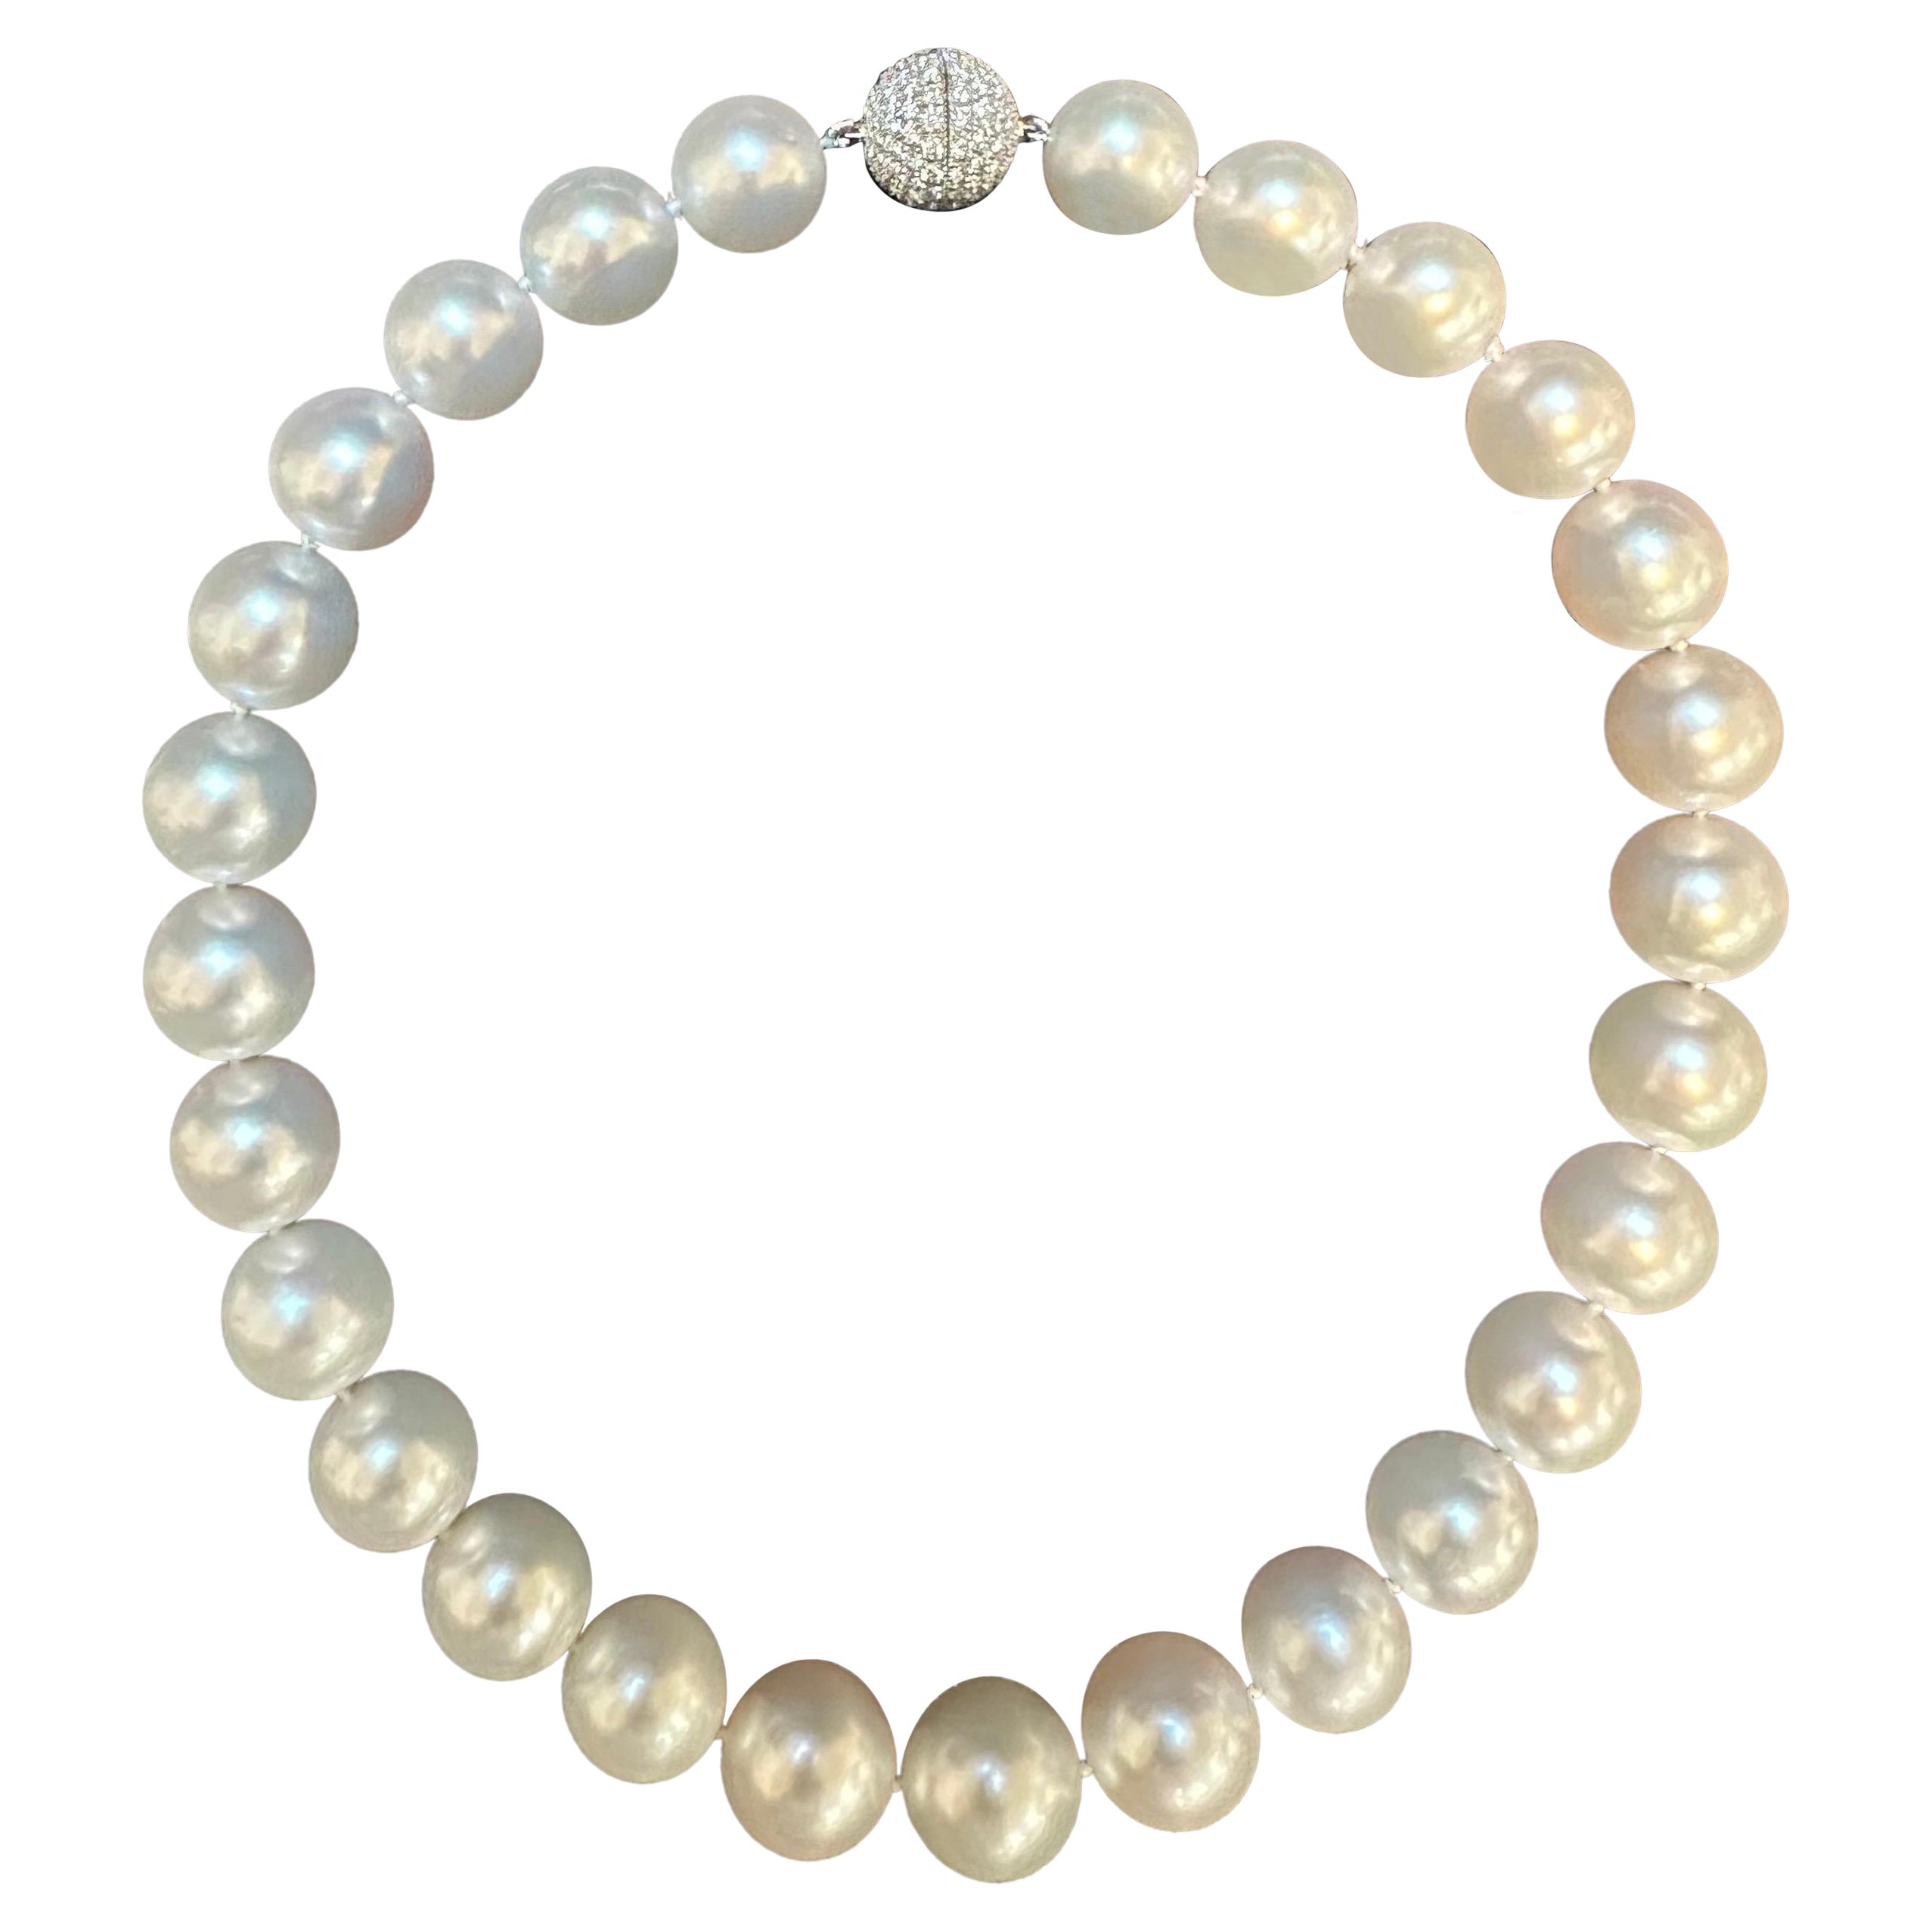 13-16 mm White South Sea Round Pearl Necklace - AAA Quality, 27 P, Diamond Ball